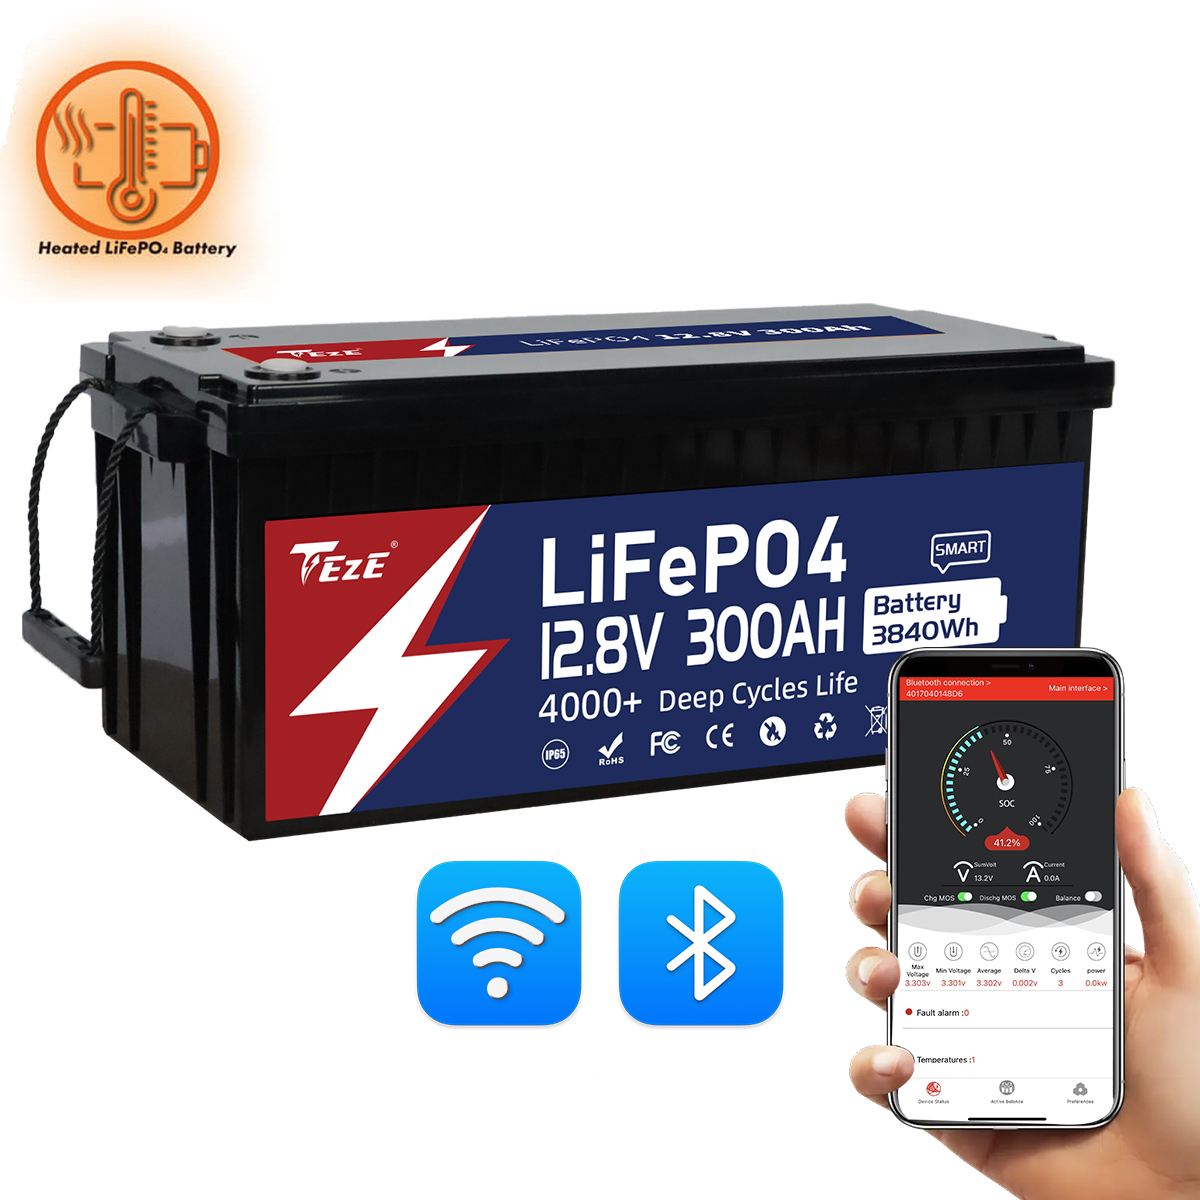 New Add WiFi-TezePower 12V 300Ah LiFePO4 Battery with WiFi and Bluetooth, Self-heating and Active Balancer, Built-in 200A Daly BMS(WiFi Built-in Version)-TezePower